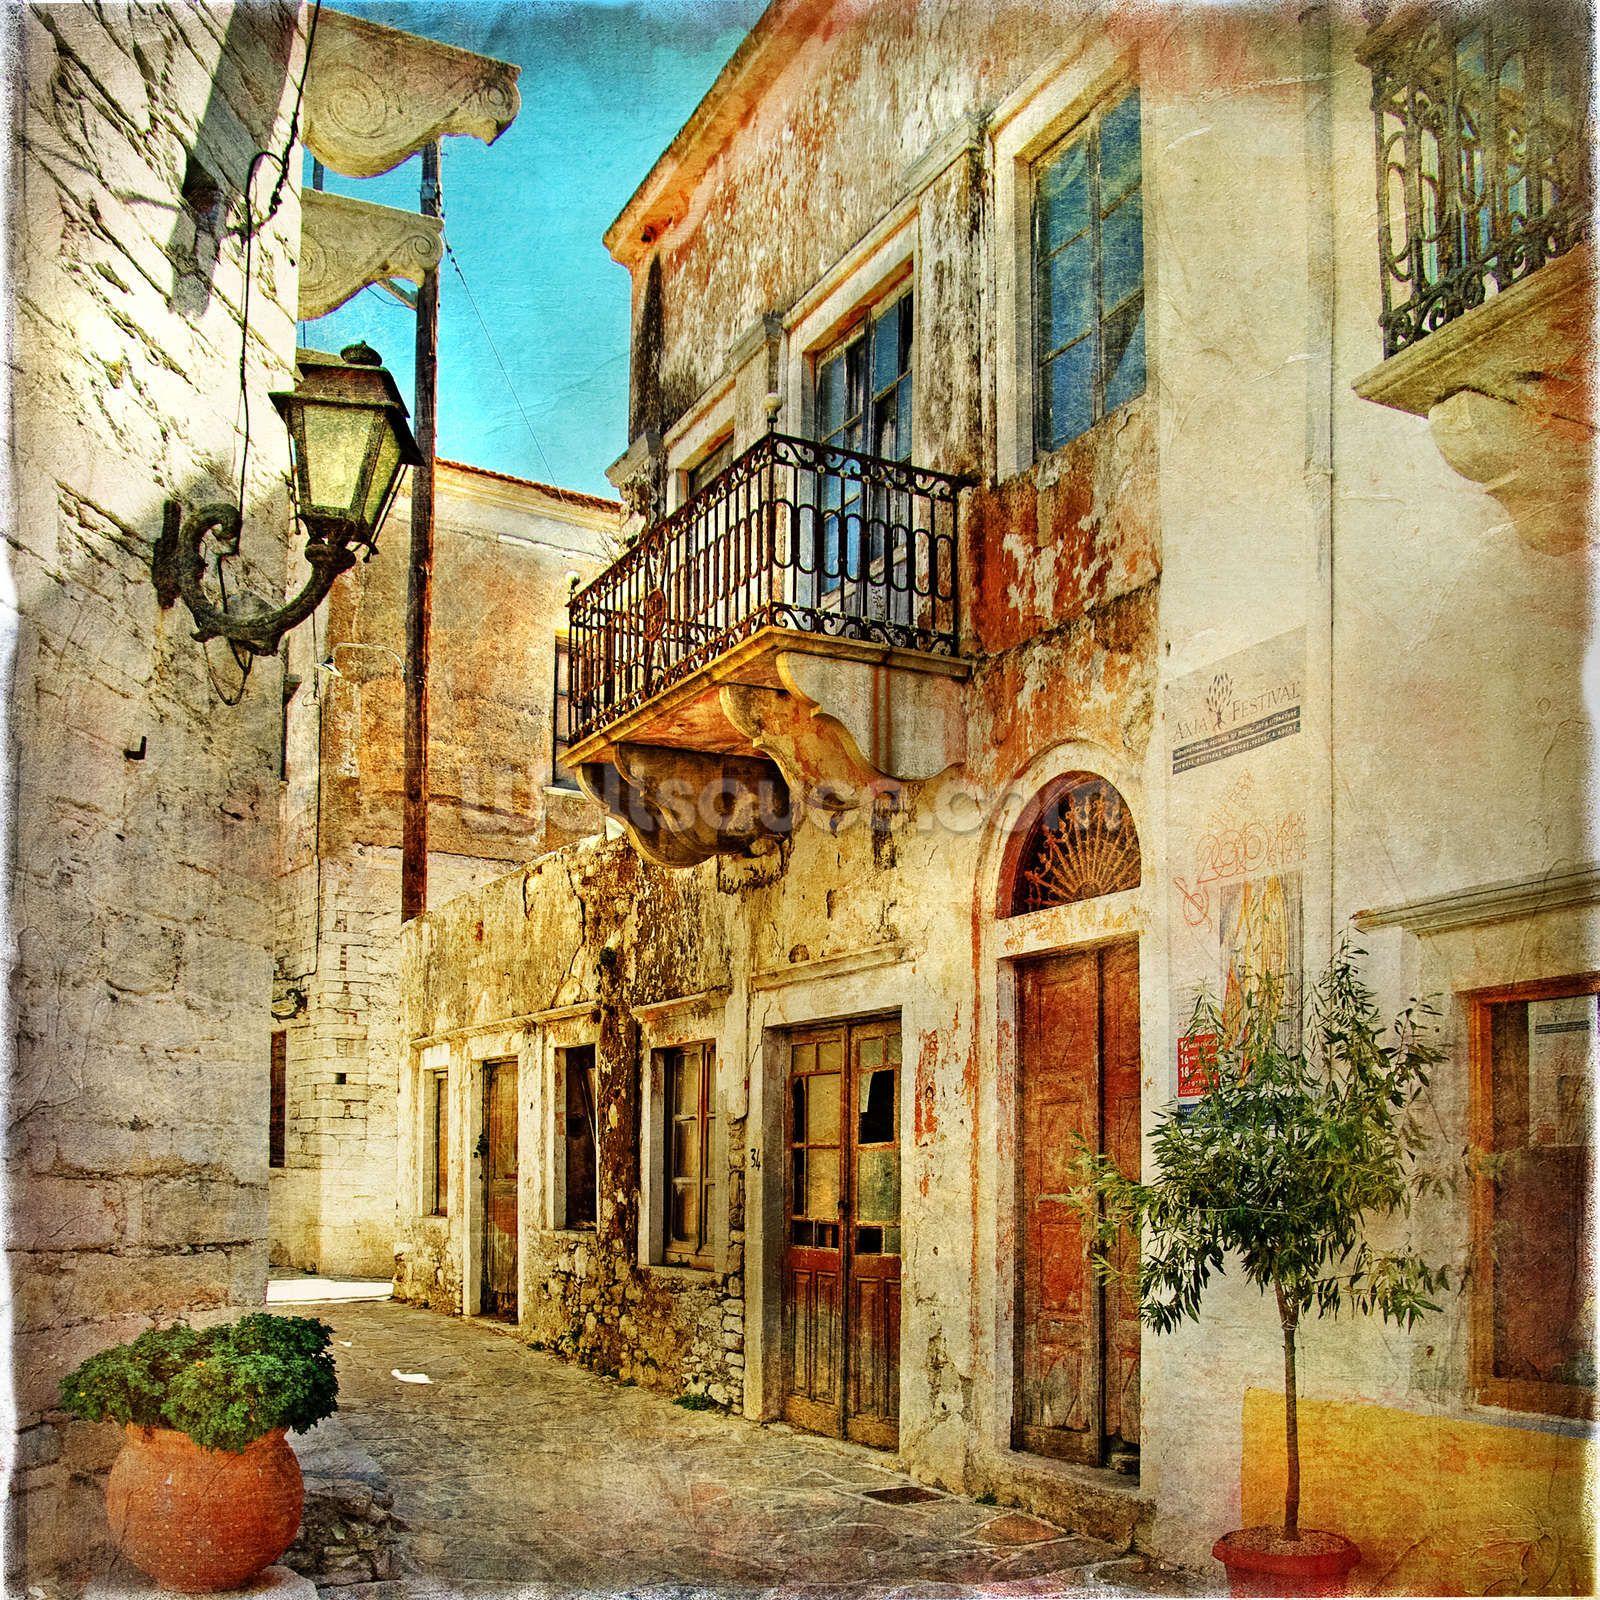 Old Town, Greece Wallpaper Wall Mural